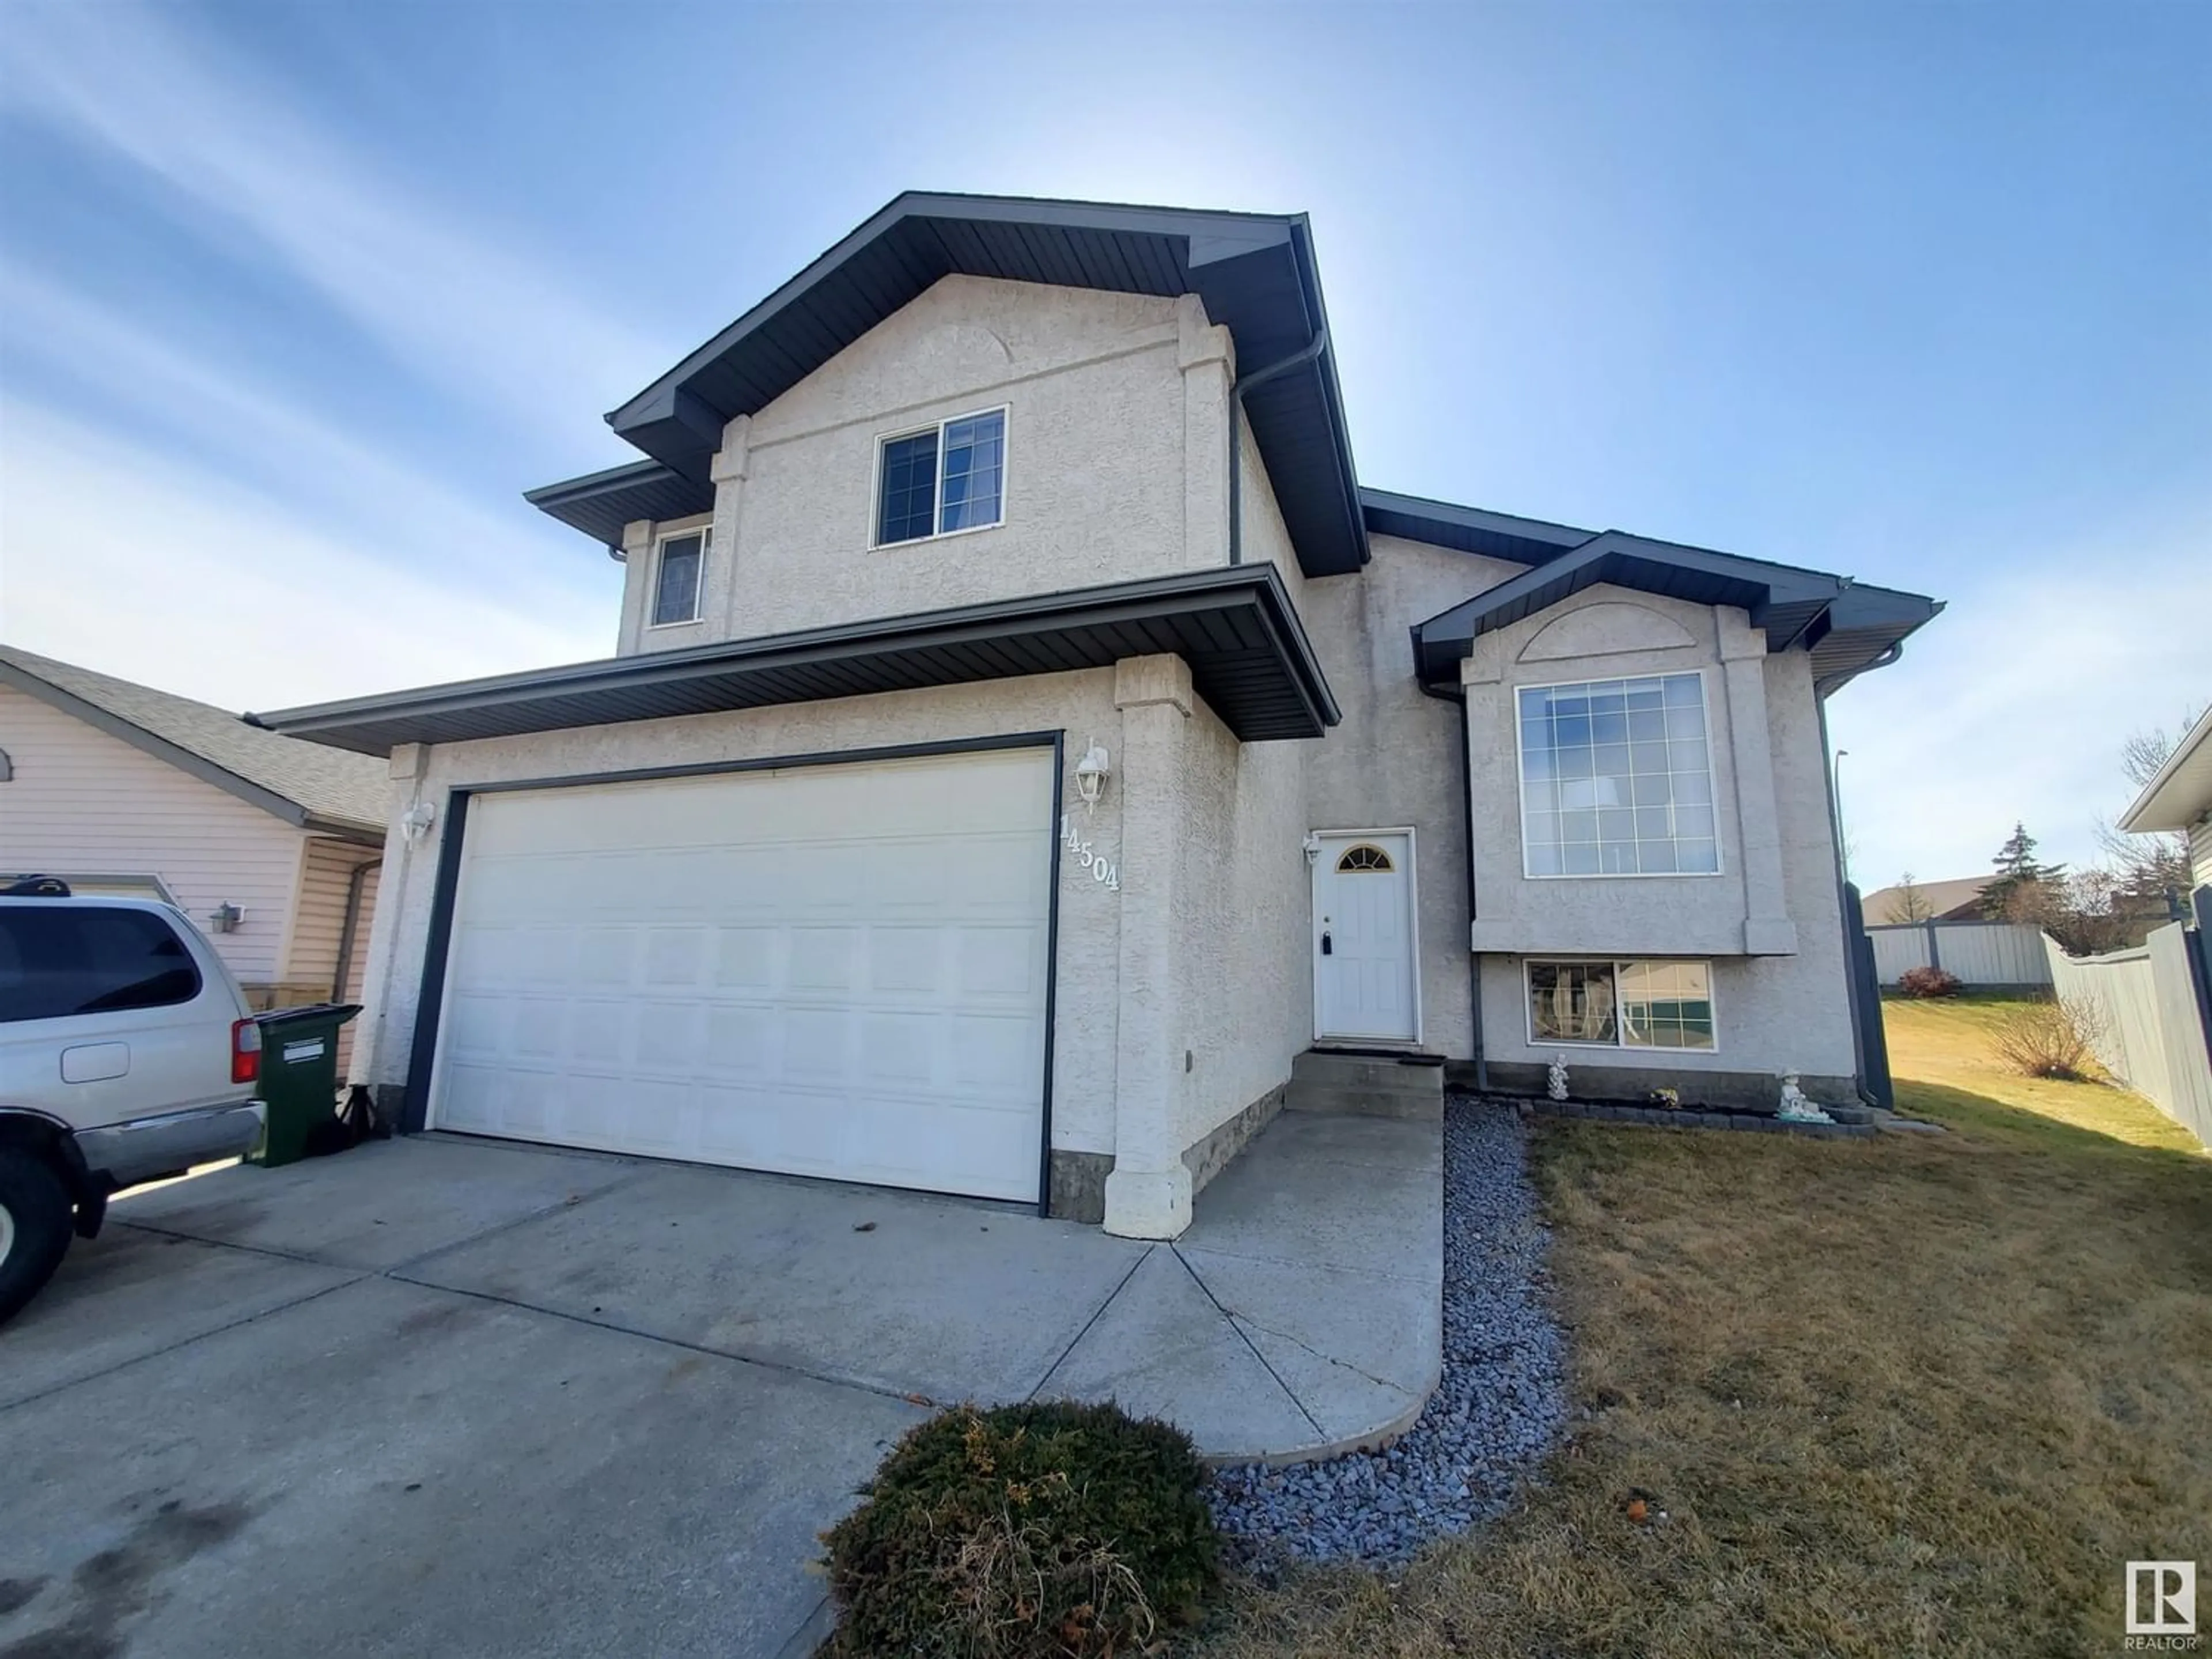 Frontside or backside of a home for 14504 49 ST NW, Edmonton Alberta T5Y2X8